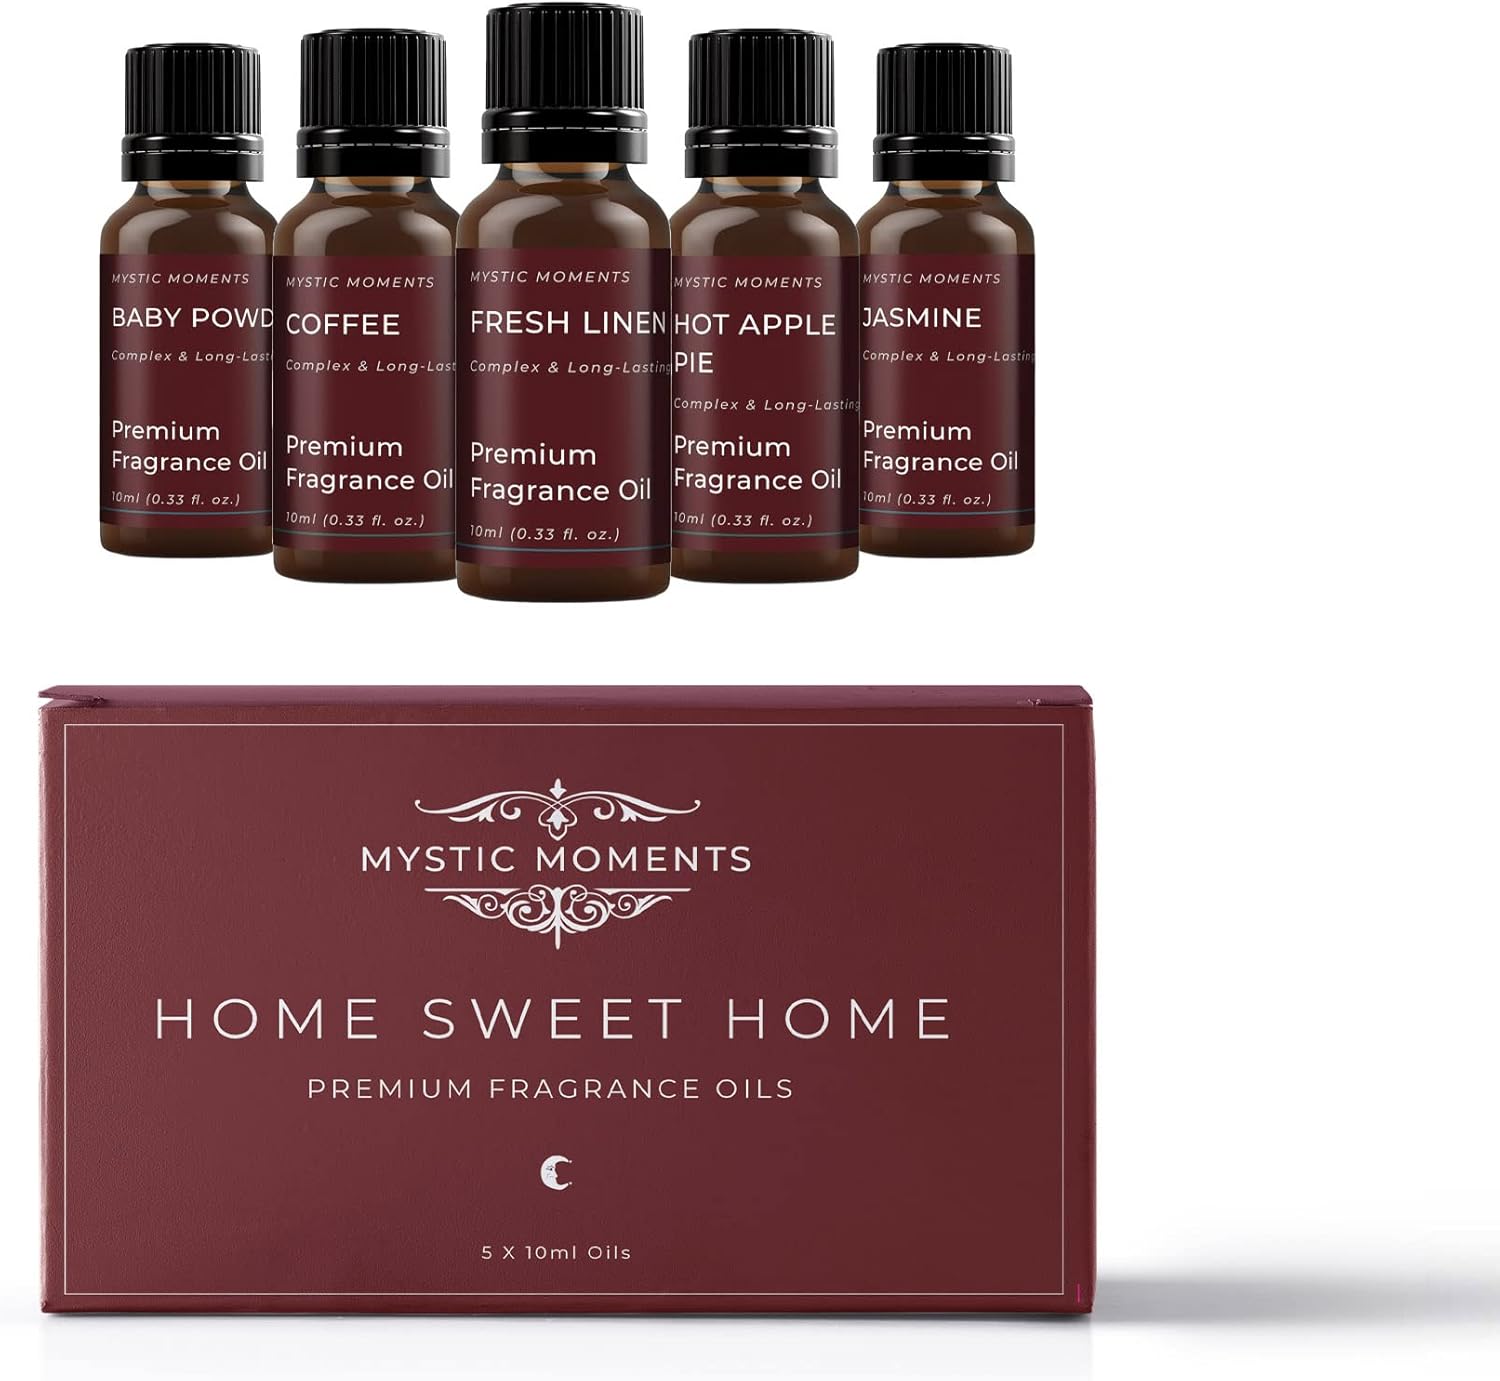 Mystic Moments | Home Sweet Home Fragrance Oil Gift Starter Pack 5x10ml | Baby Powder, Hot Apple Pie, Coffee, Fresh Linen, Jasmine | Perfect as a gift